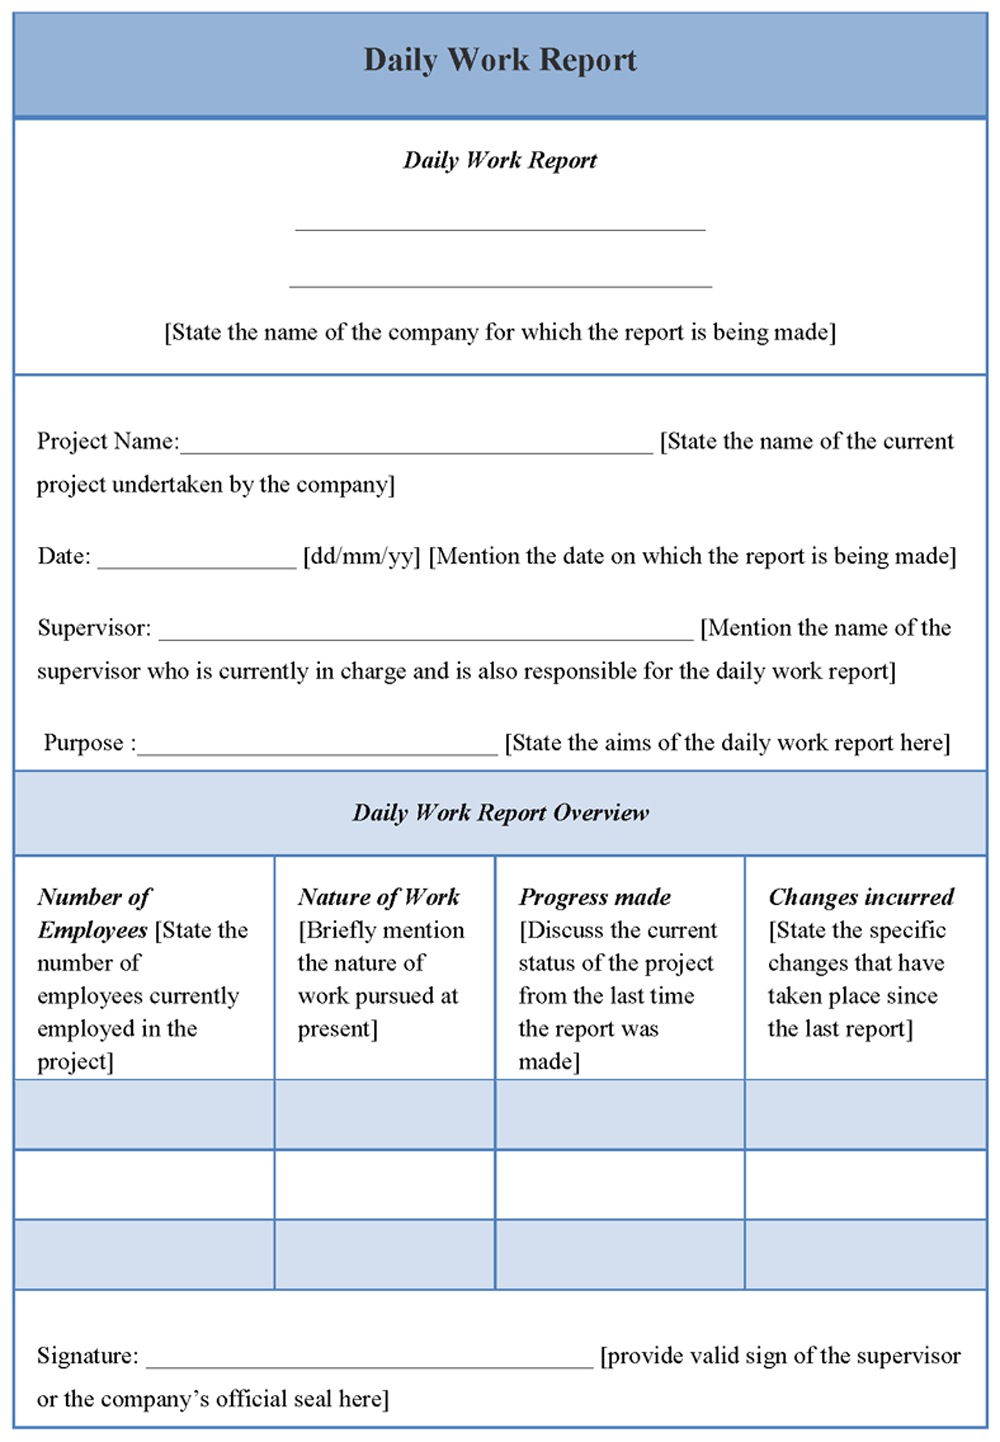 Inspirational Daily Work Report Template With Blue Table Within Daily Work Report Template